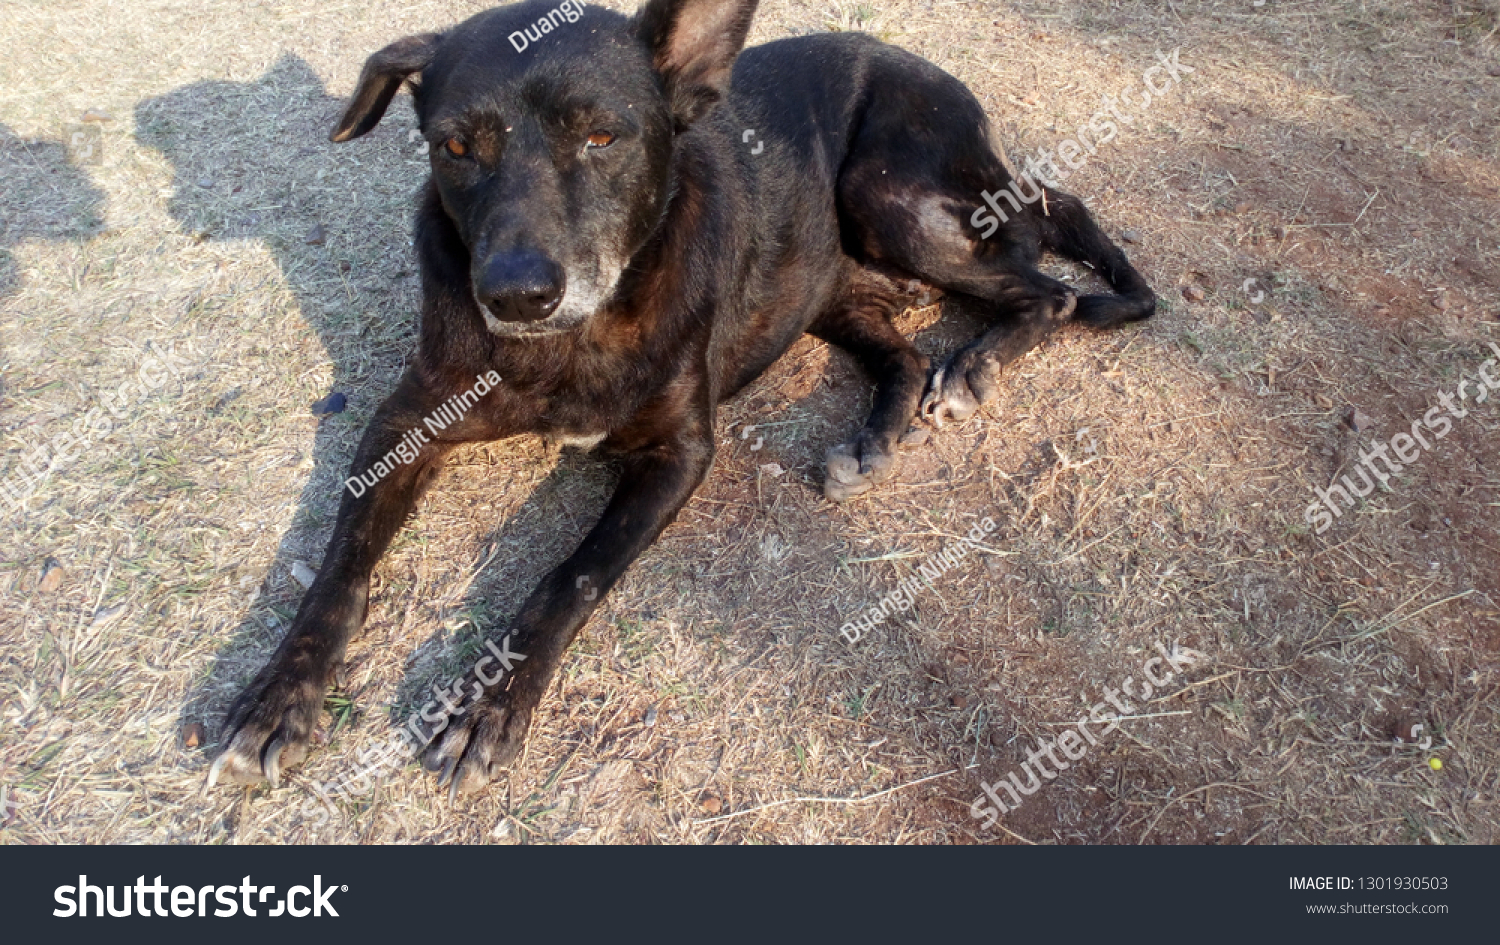 A black dog with a disability in her legs ..And poor health.. lying on the ground in the midst of strong sunlight until the shadow. #1301930503